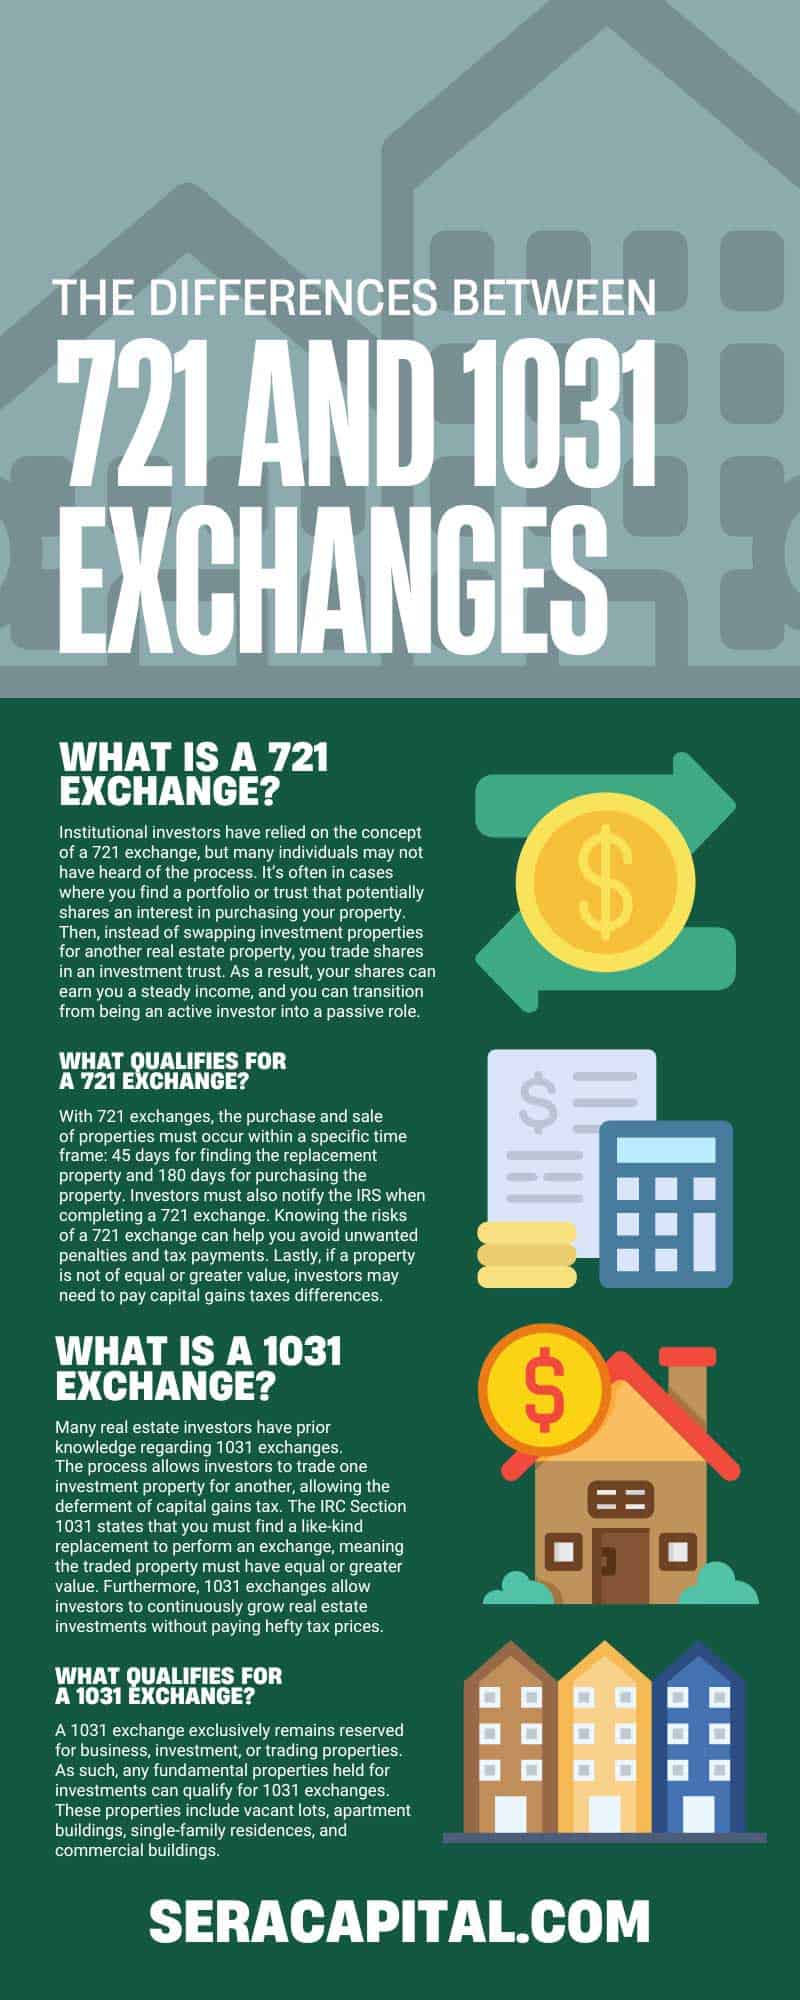 The Differences Between 721 and 1031 Exchanges